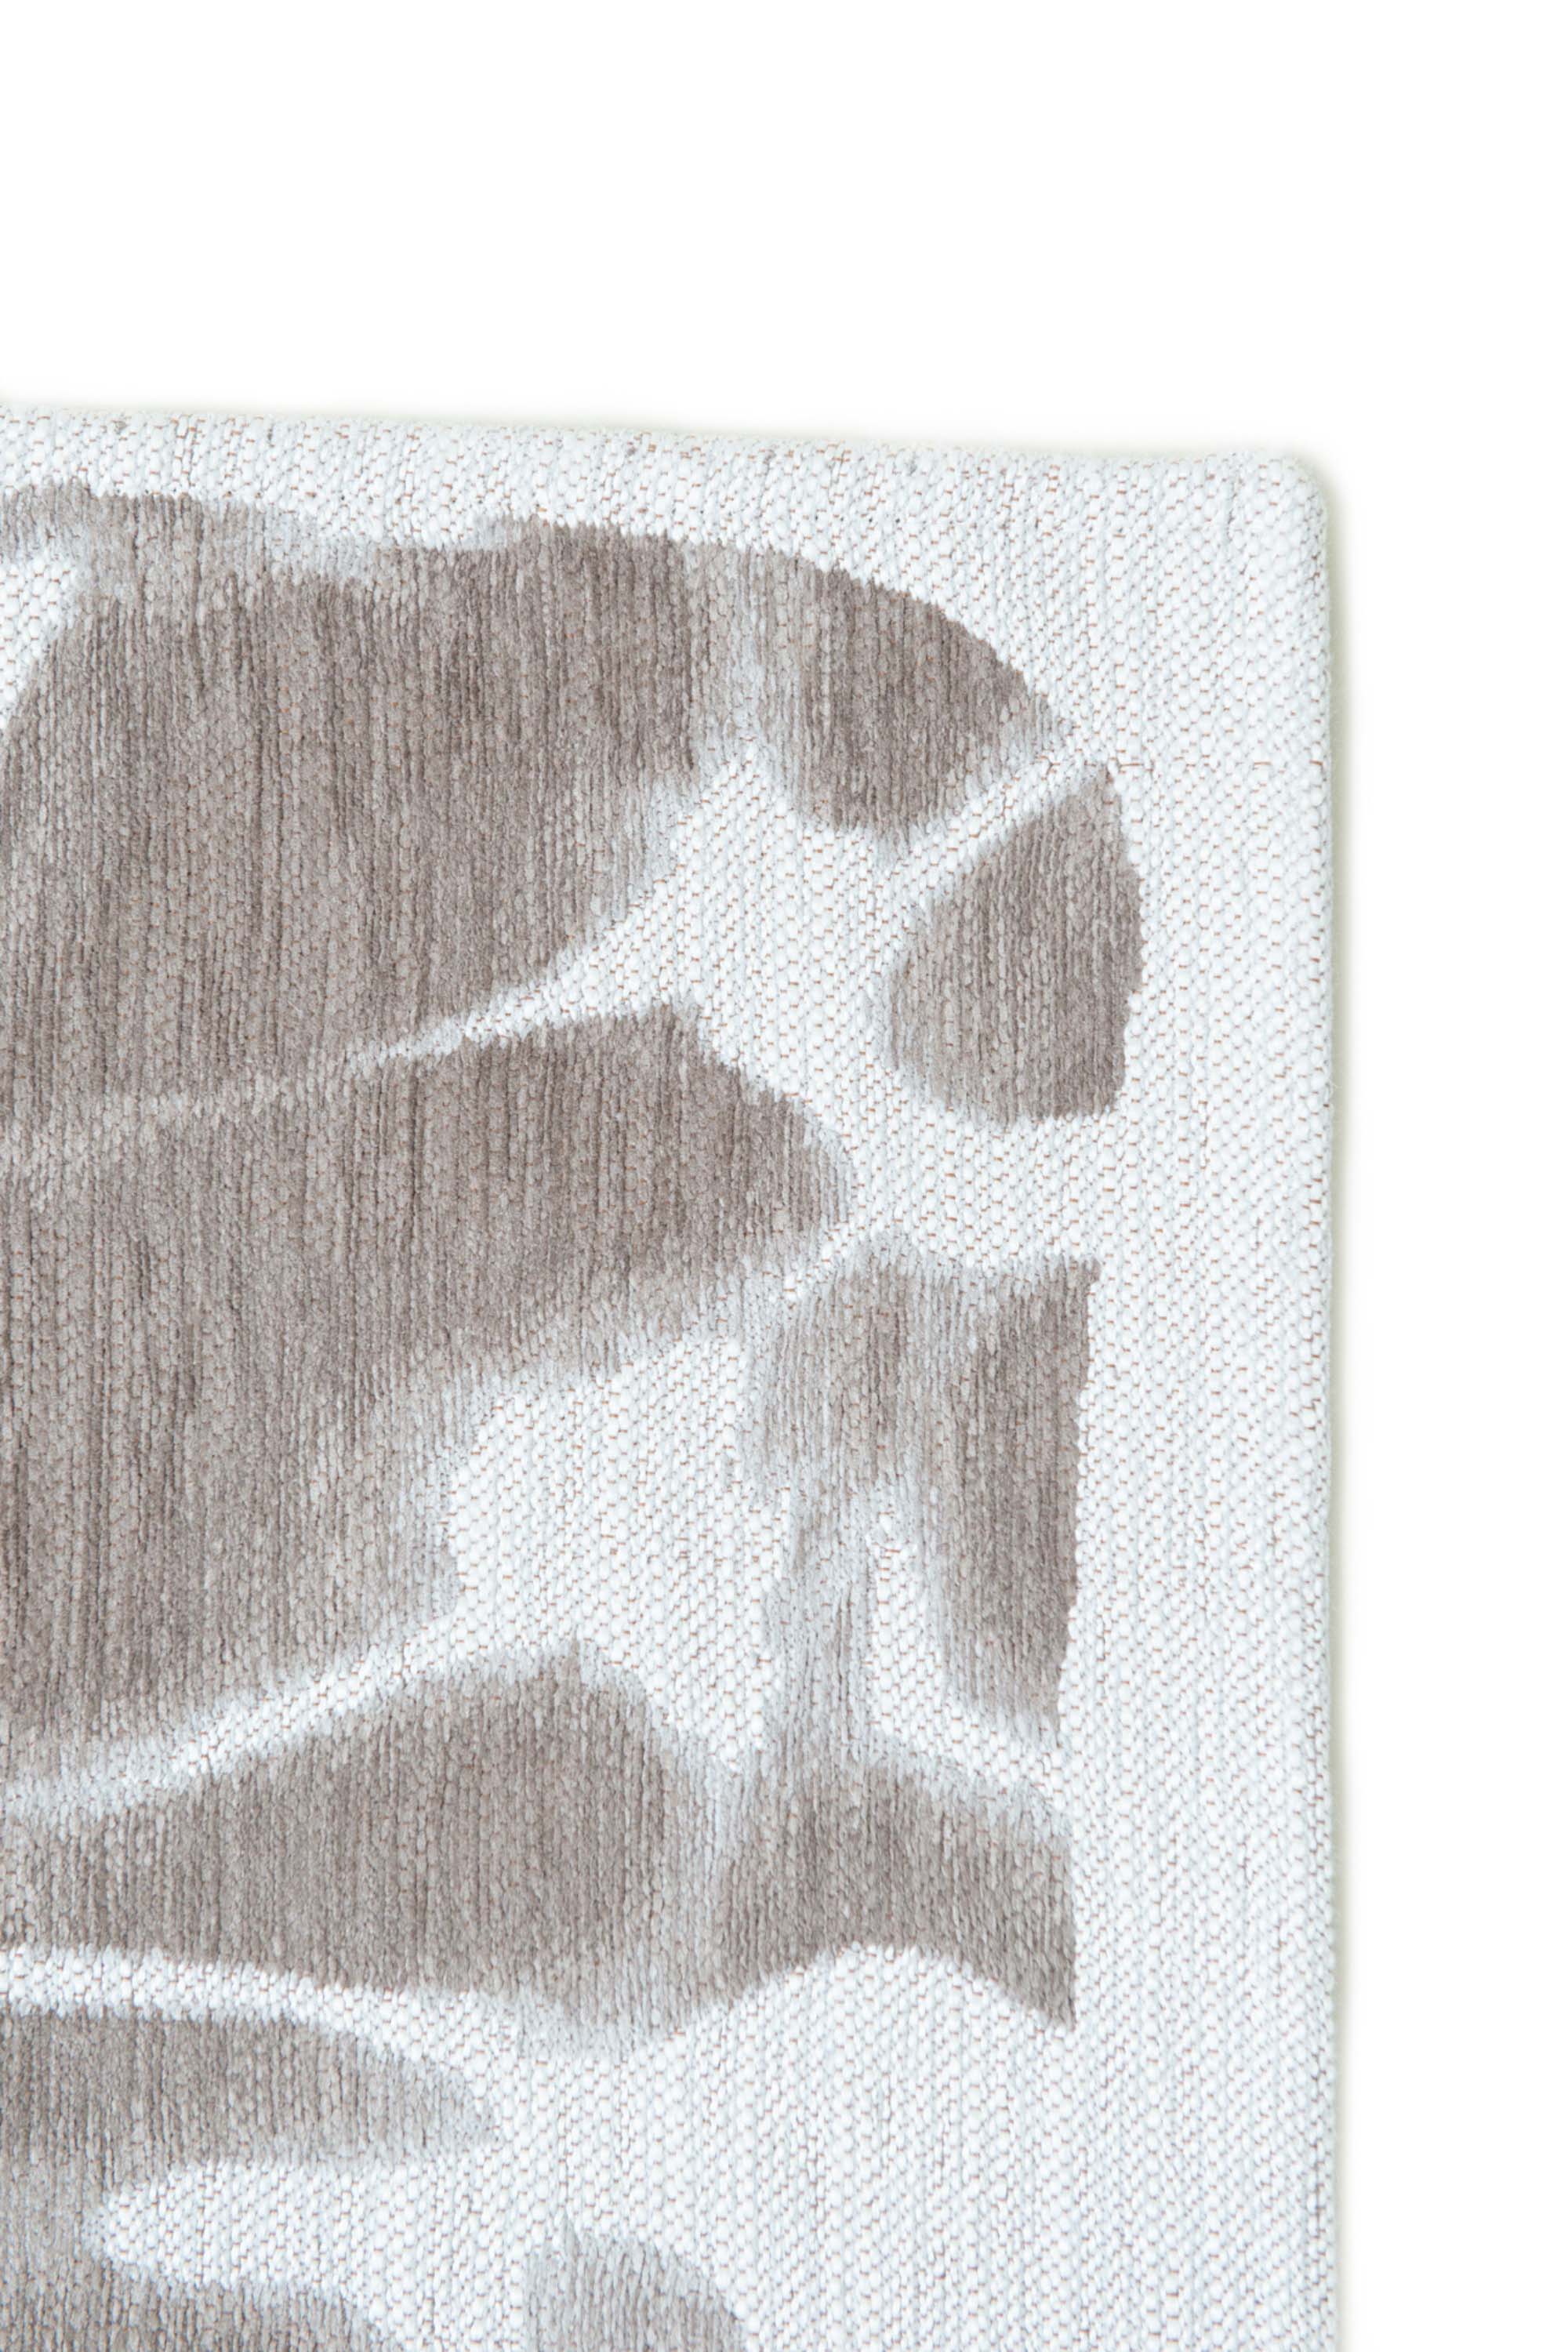 Modern runner rug with silver abstract water inspired pattern